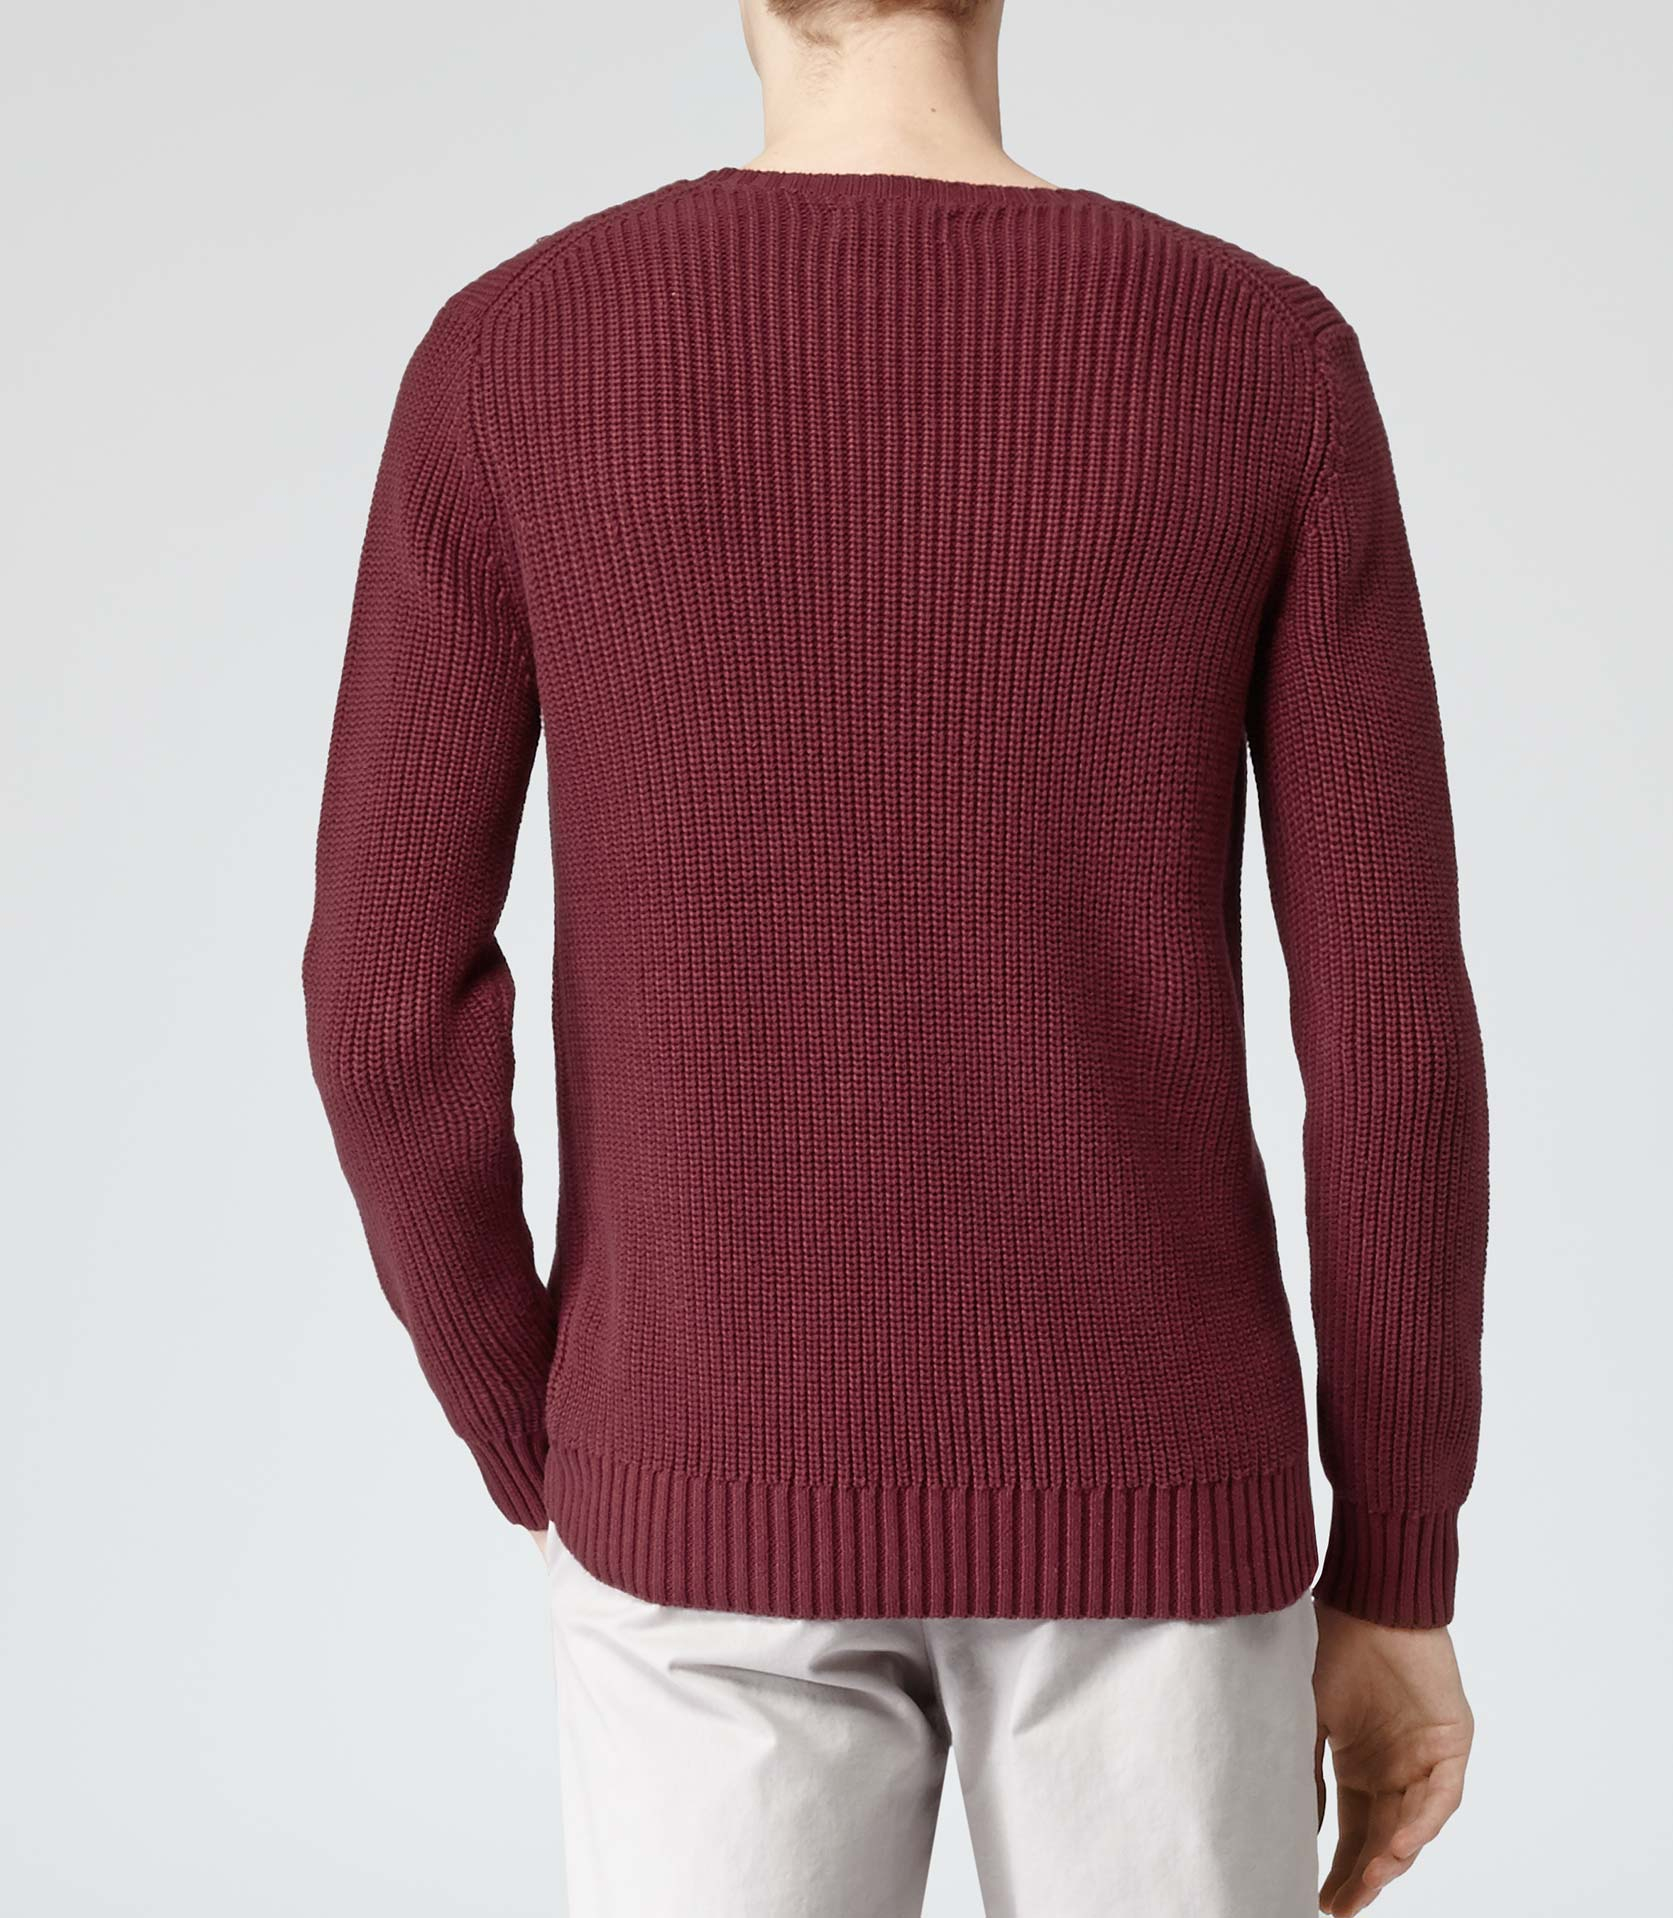 Lyst - Reiss Nerve Ribbed Knit Jumper in Red for Men